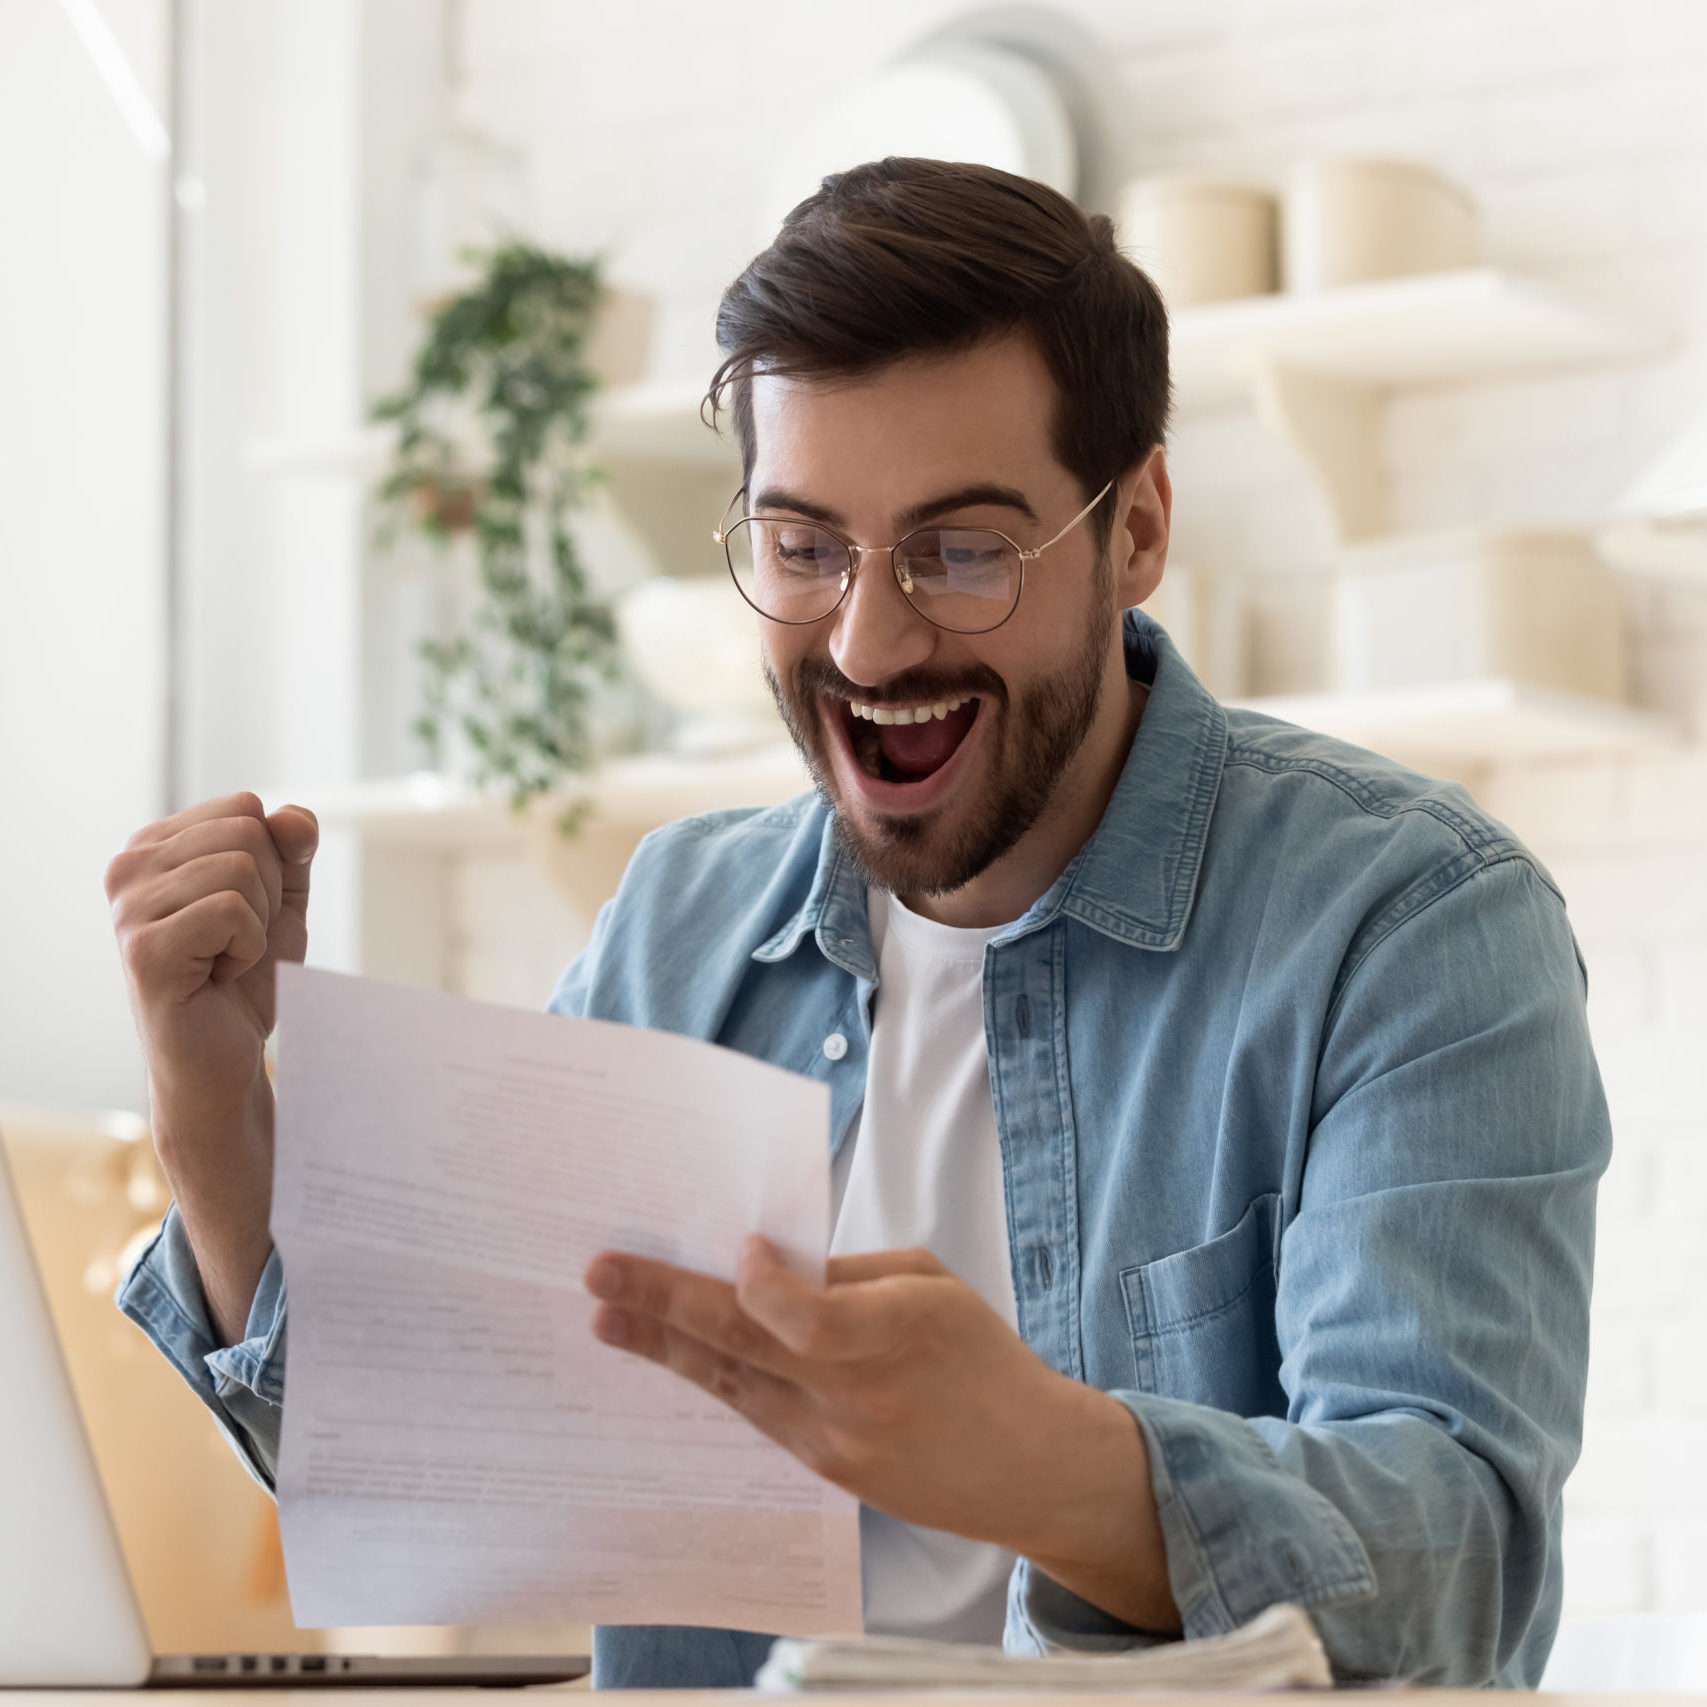 Excited euphoric happy young man holding reading paper postal mail letter amazed overjoyed by good news, got new job celebrate taxes refund receive salary payment loan approval sit at home table